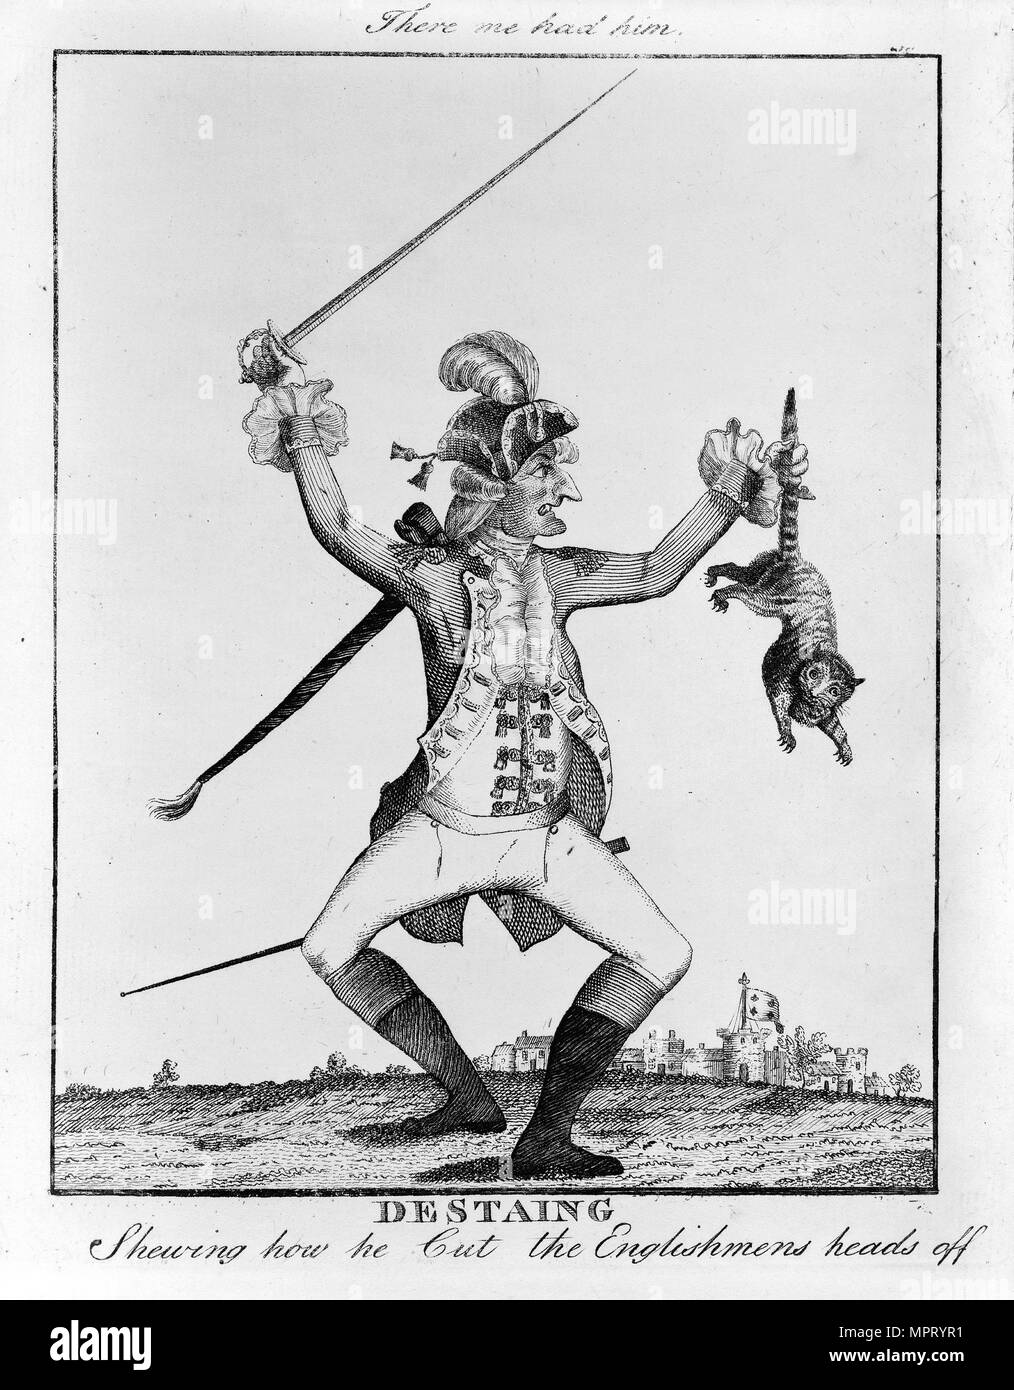 Destaing. Shewing how he Cut the Englishmens heads off, c. 1770. Stock Photo